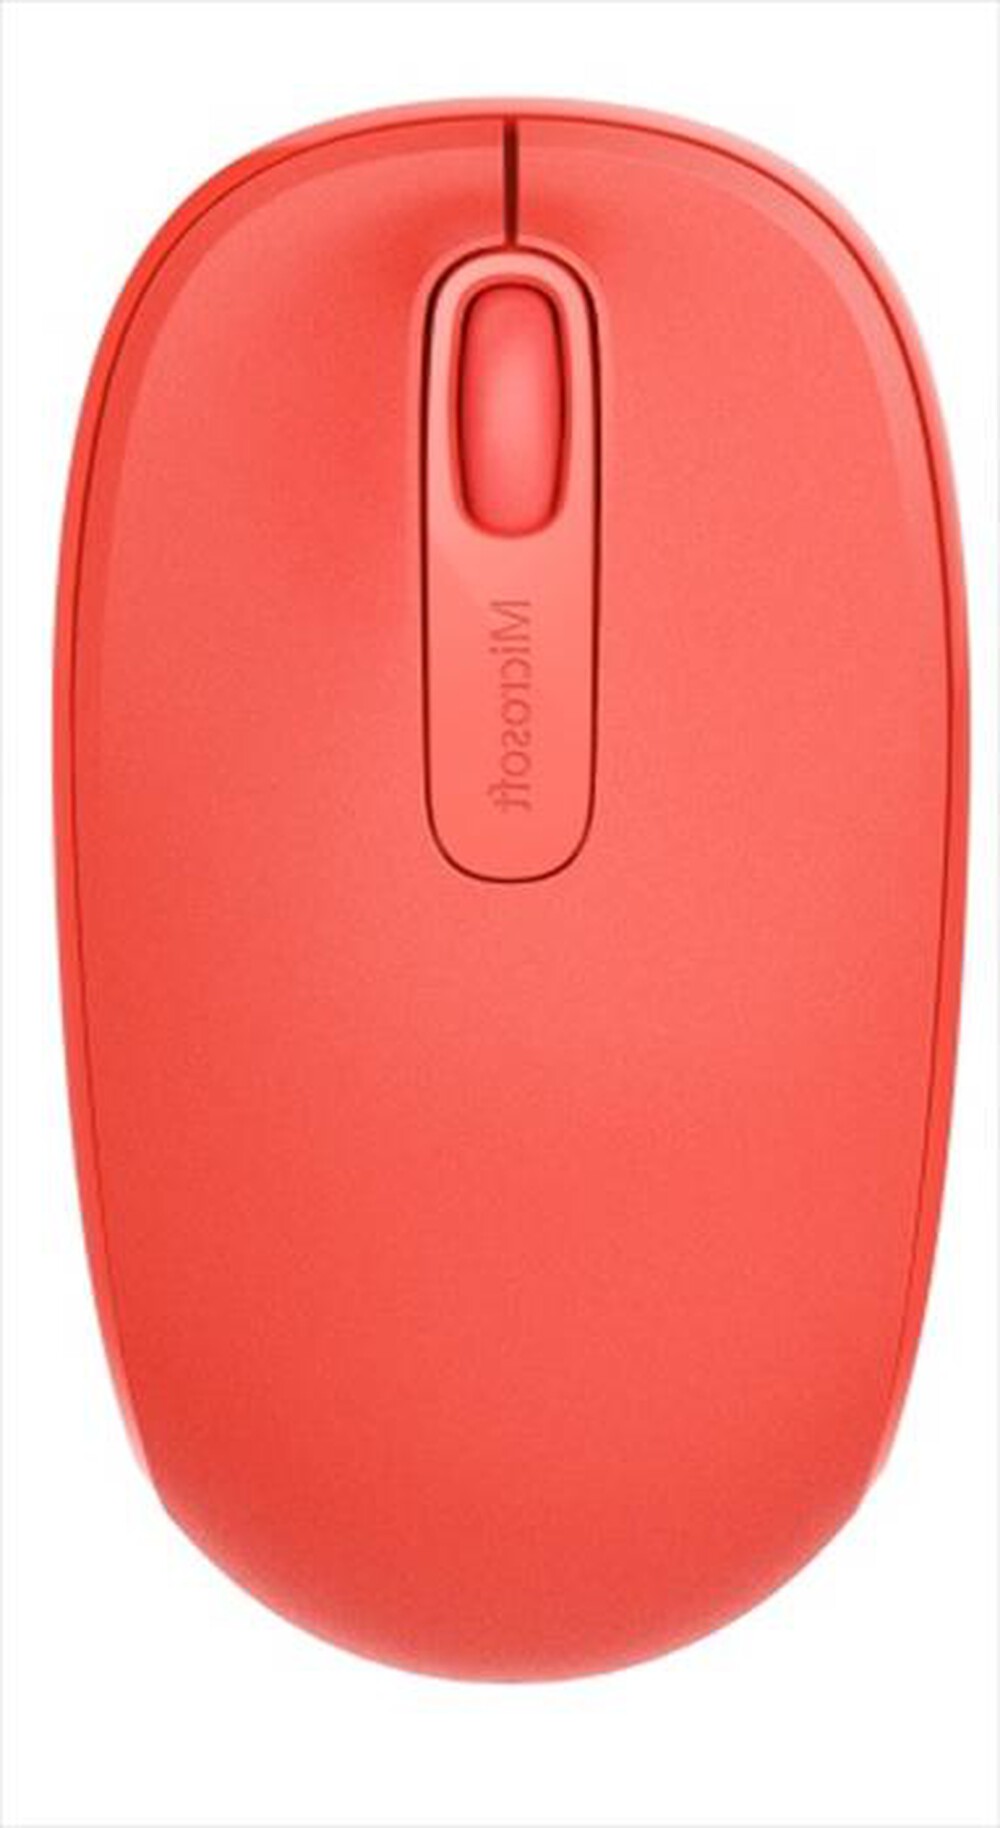 "MICROSOFT - Wireless Mobile Mouse 1850 - Flame Red V2"